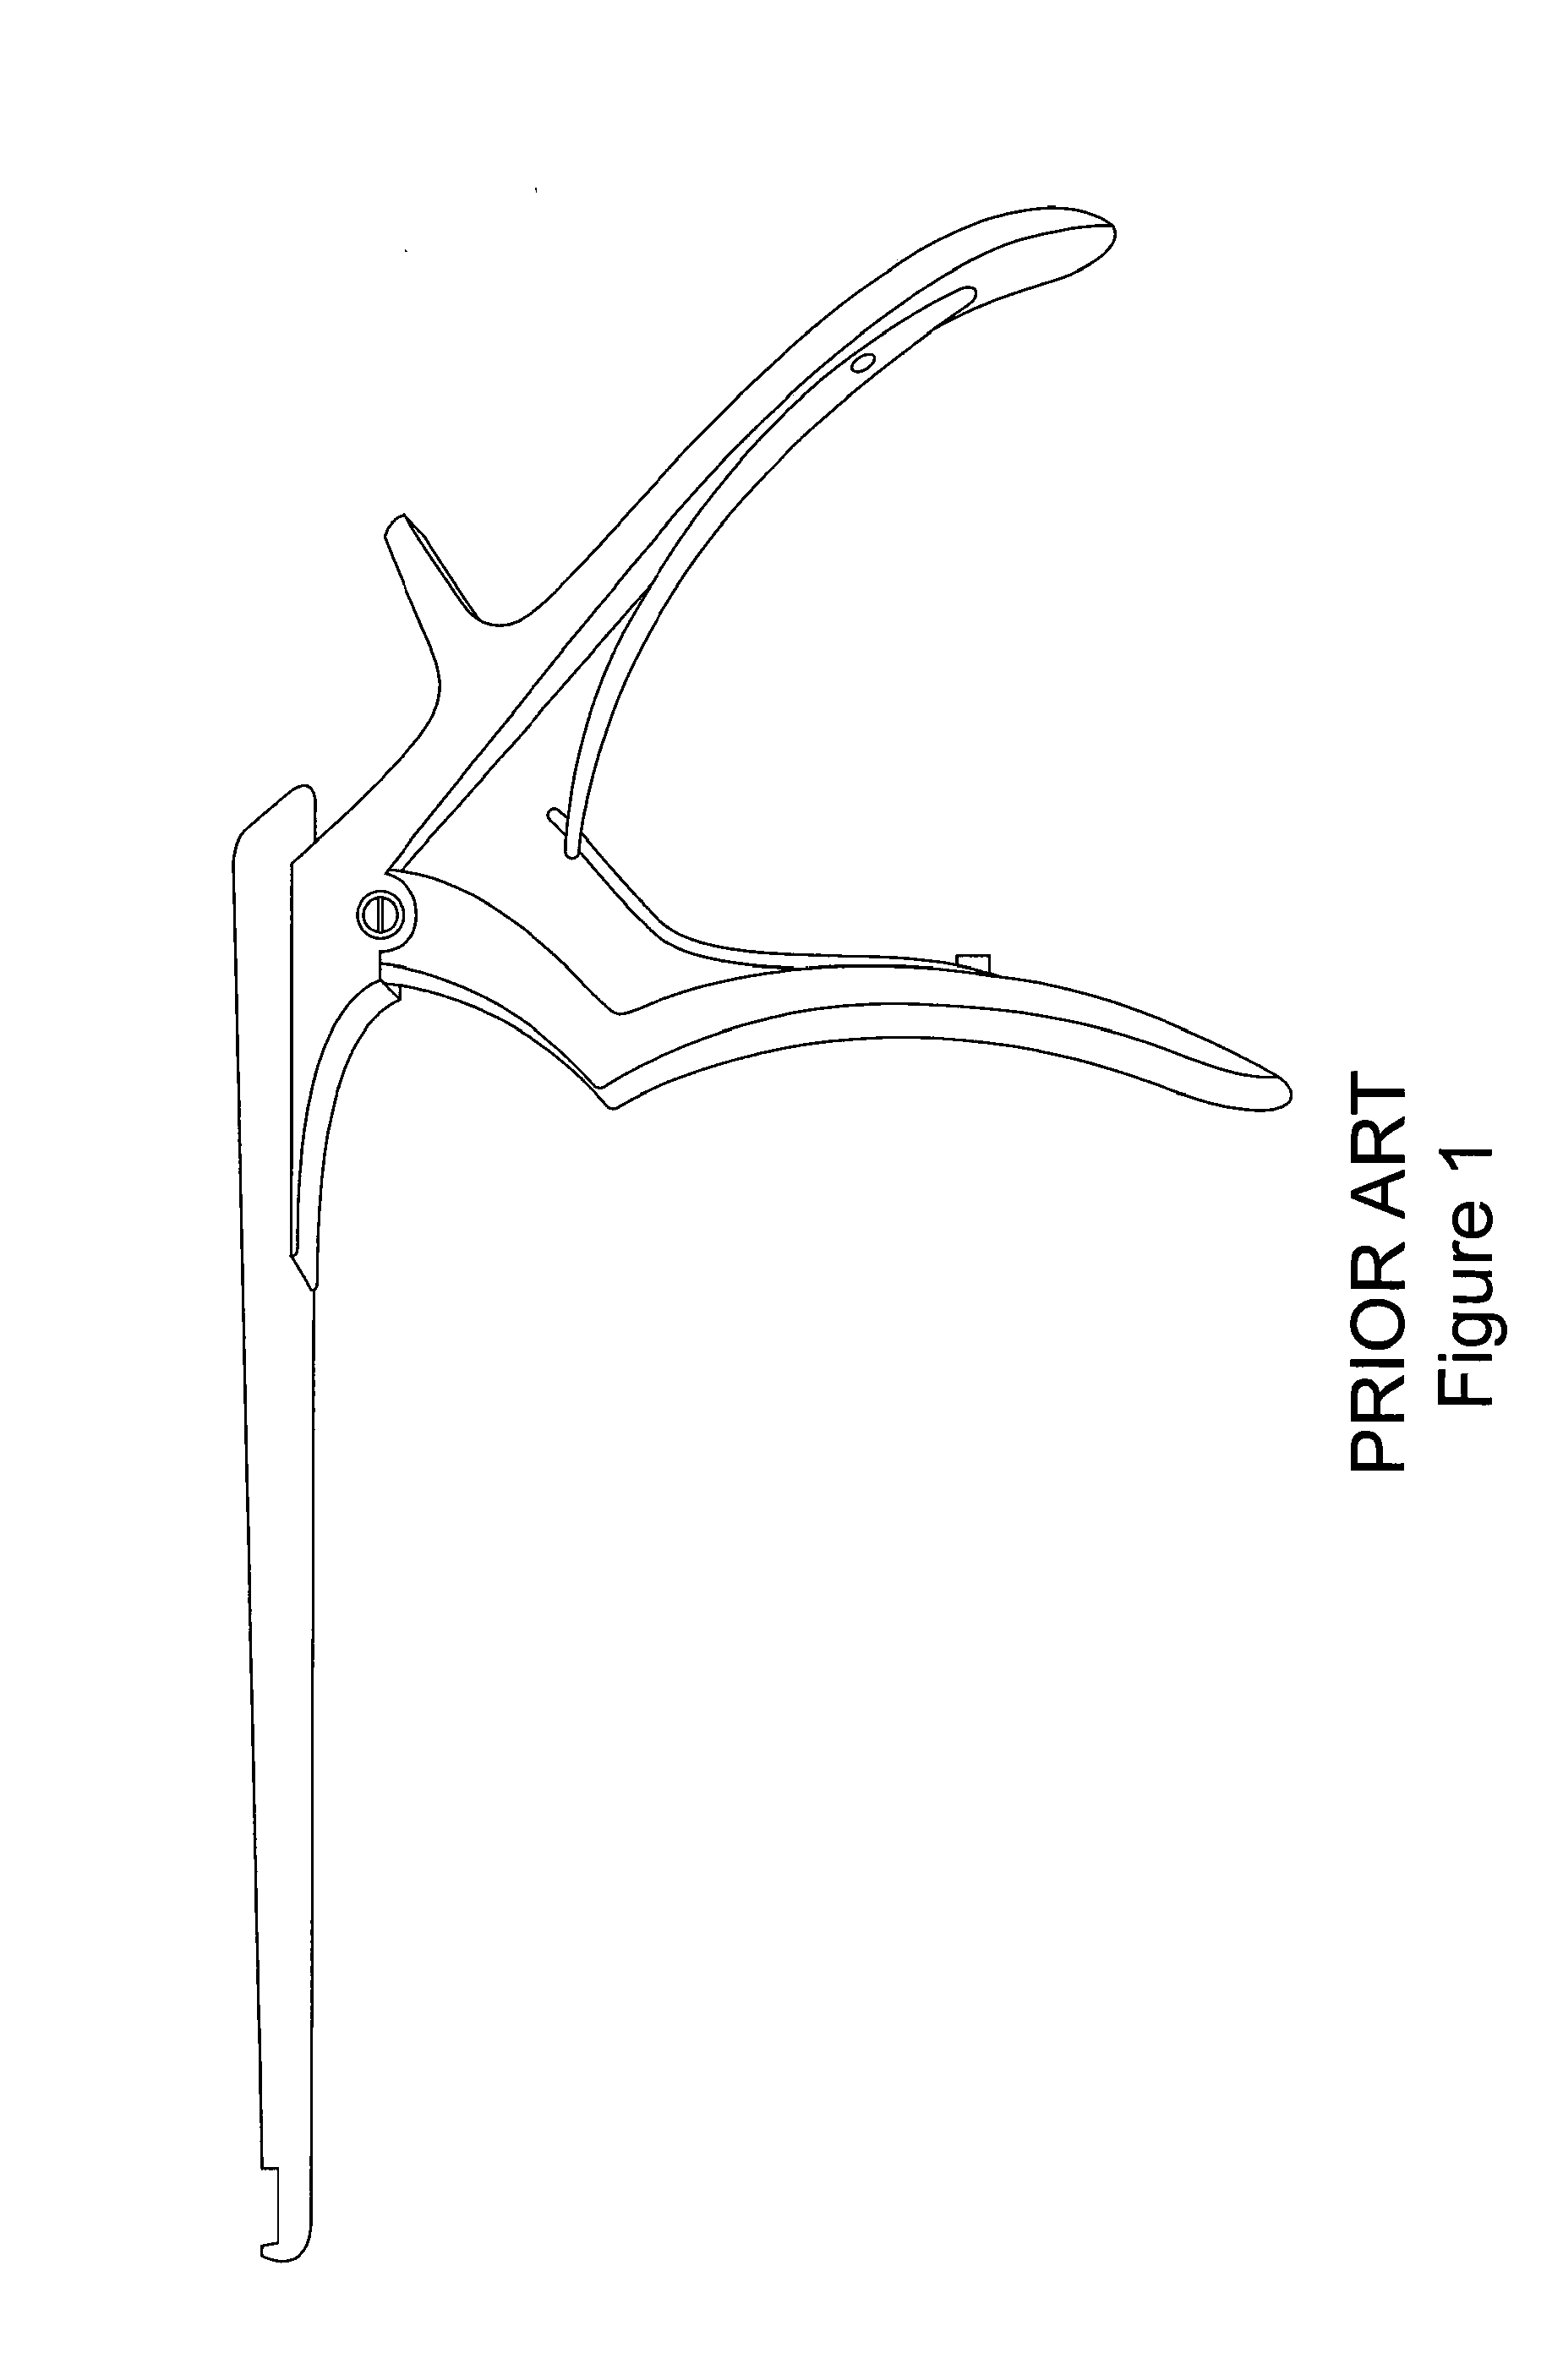 Bone-Evacuating and Valve-Exiting Resector and Method of Using Same